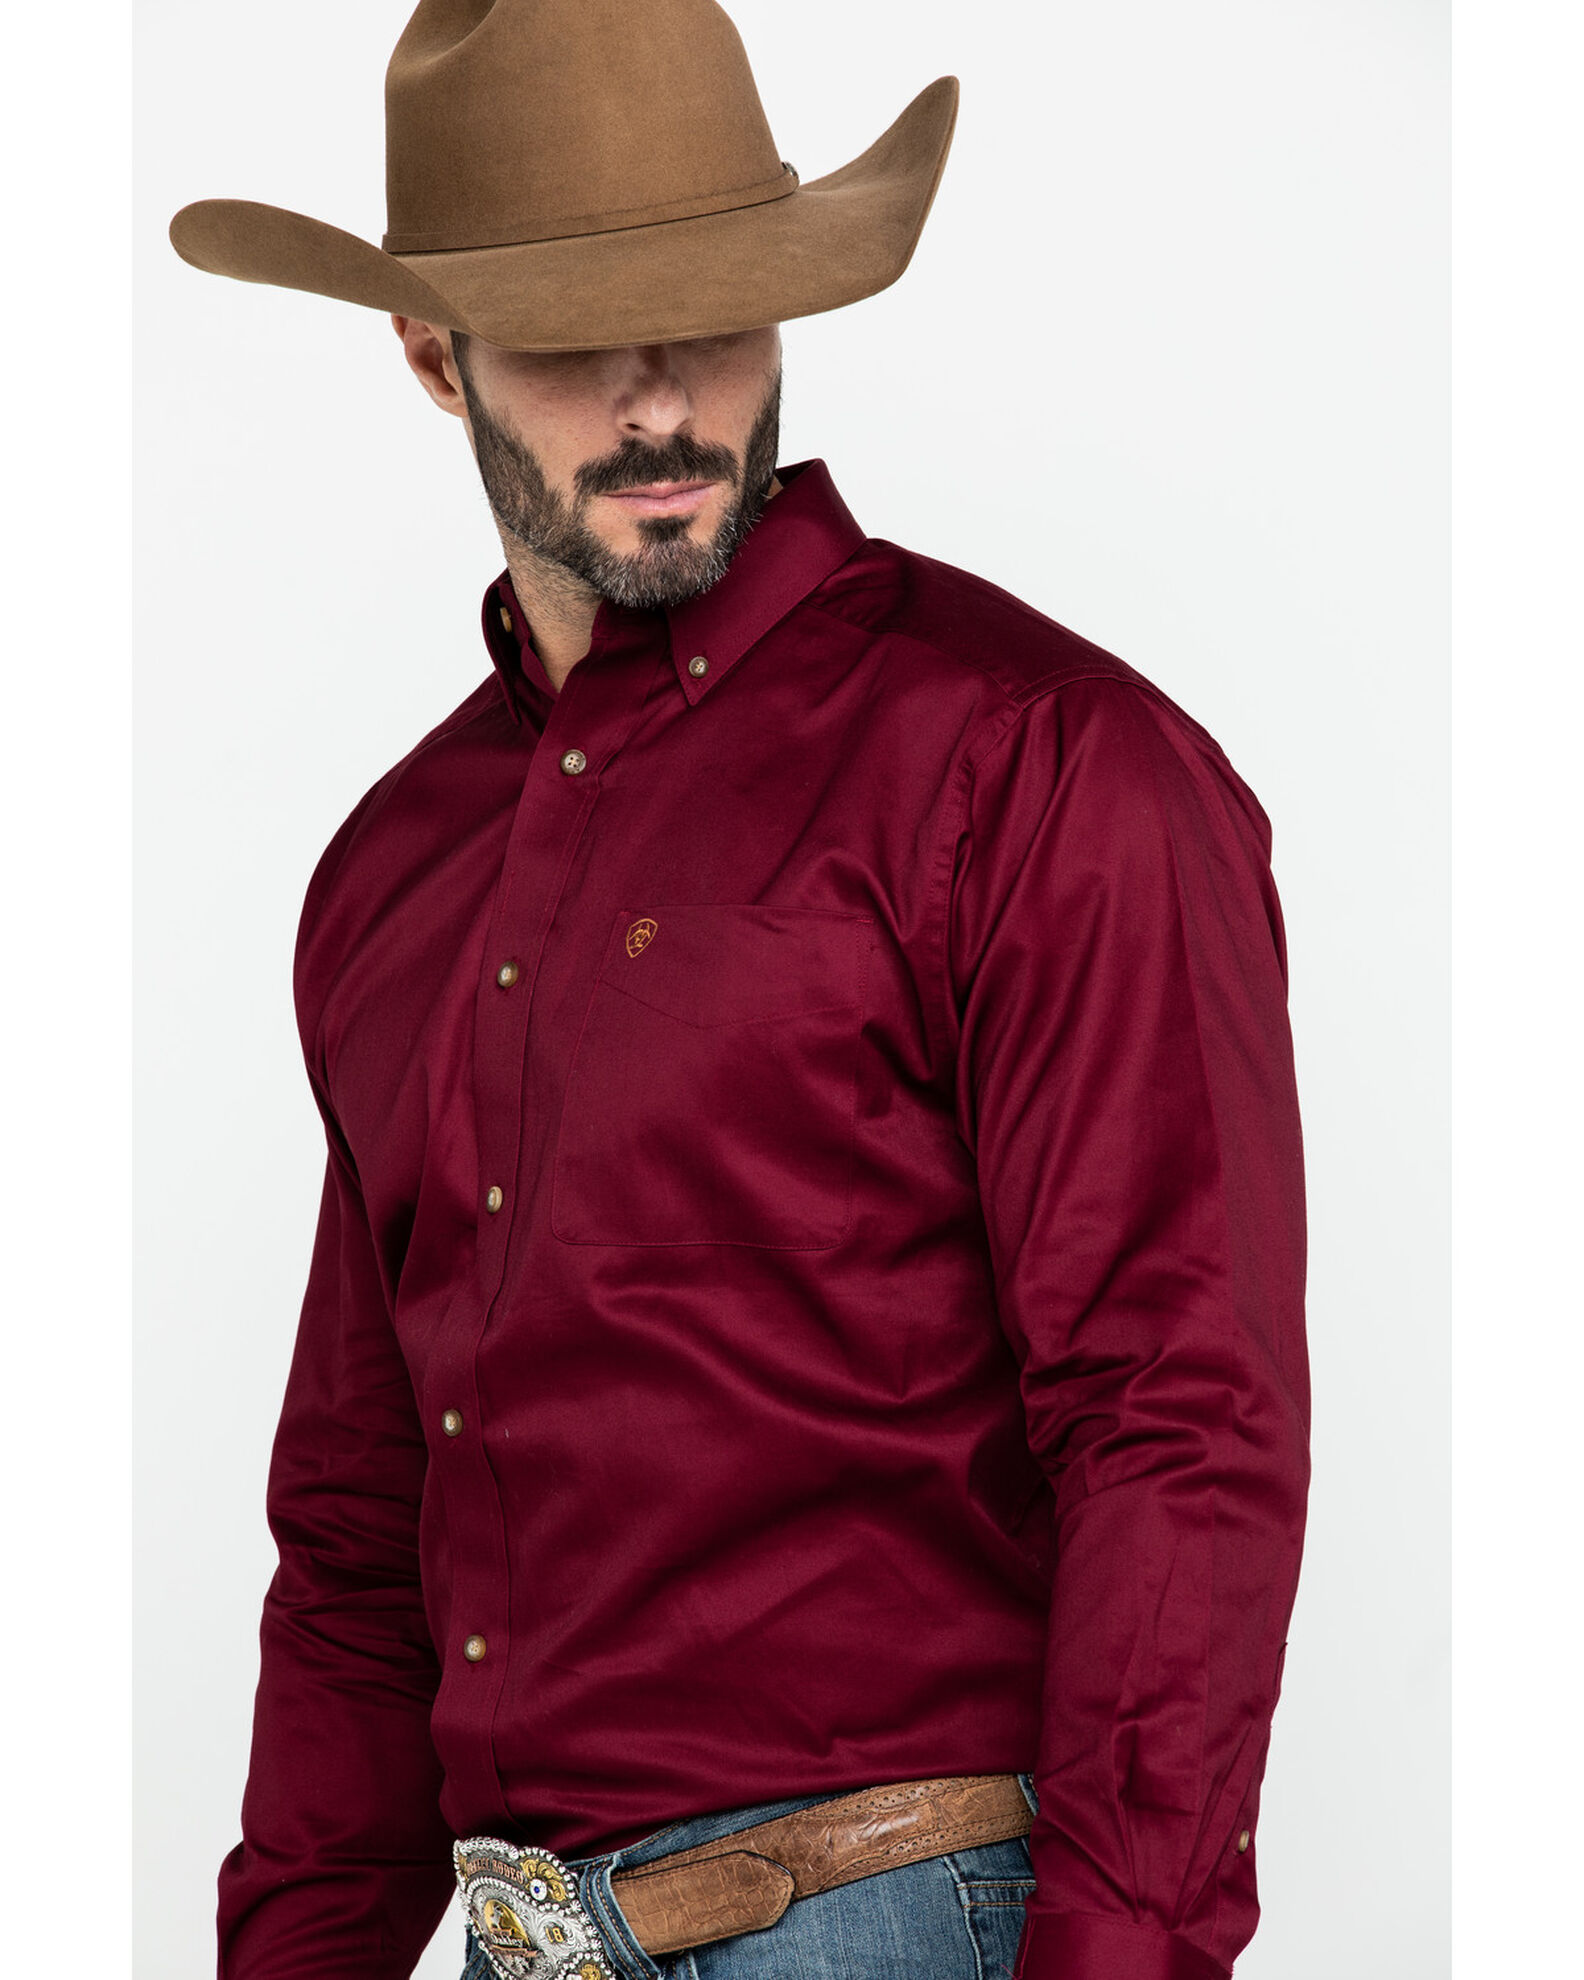 Product Name: Ariat Men's Burgundy Solid Twill Long Sleeve Western Shirt